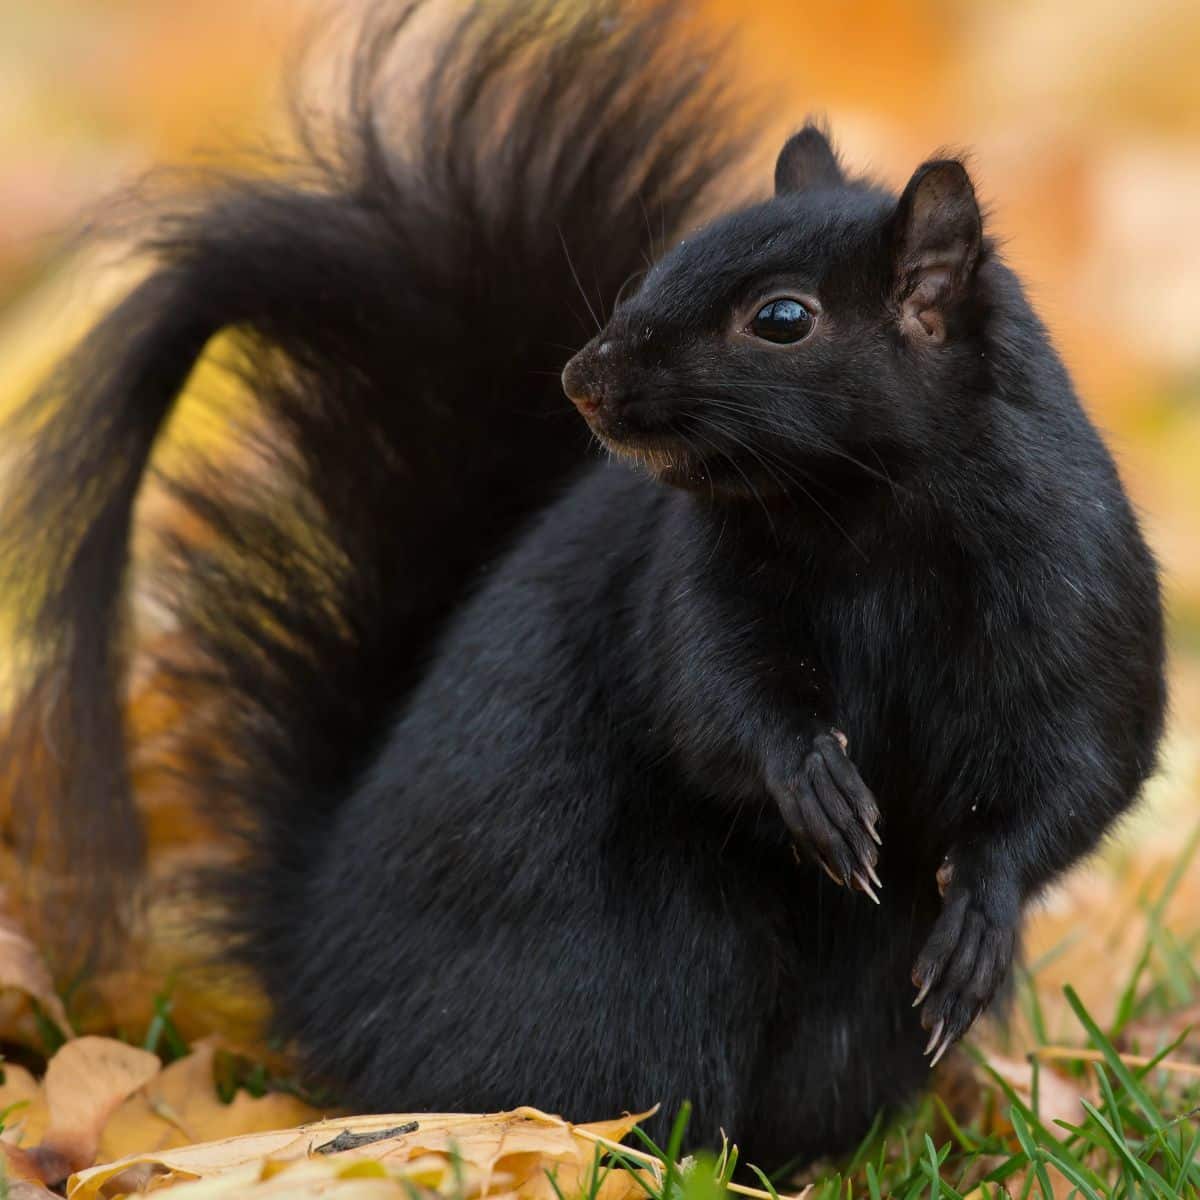 What is the spiritual meaning and symbolism of the black squirrel